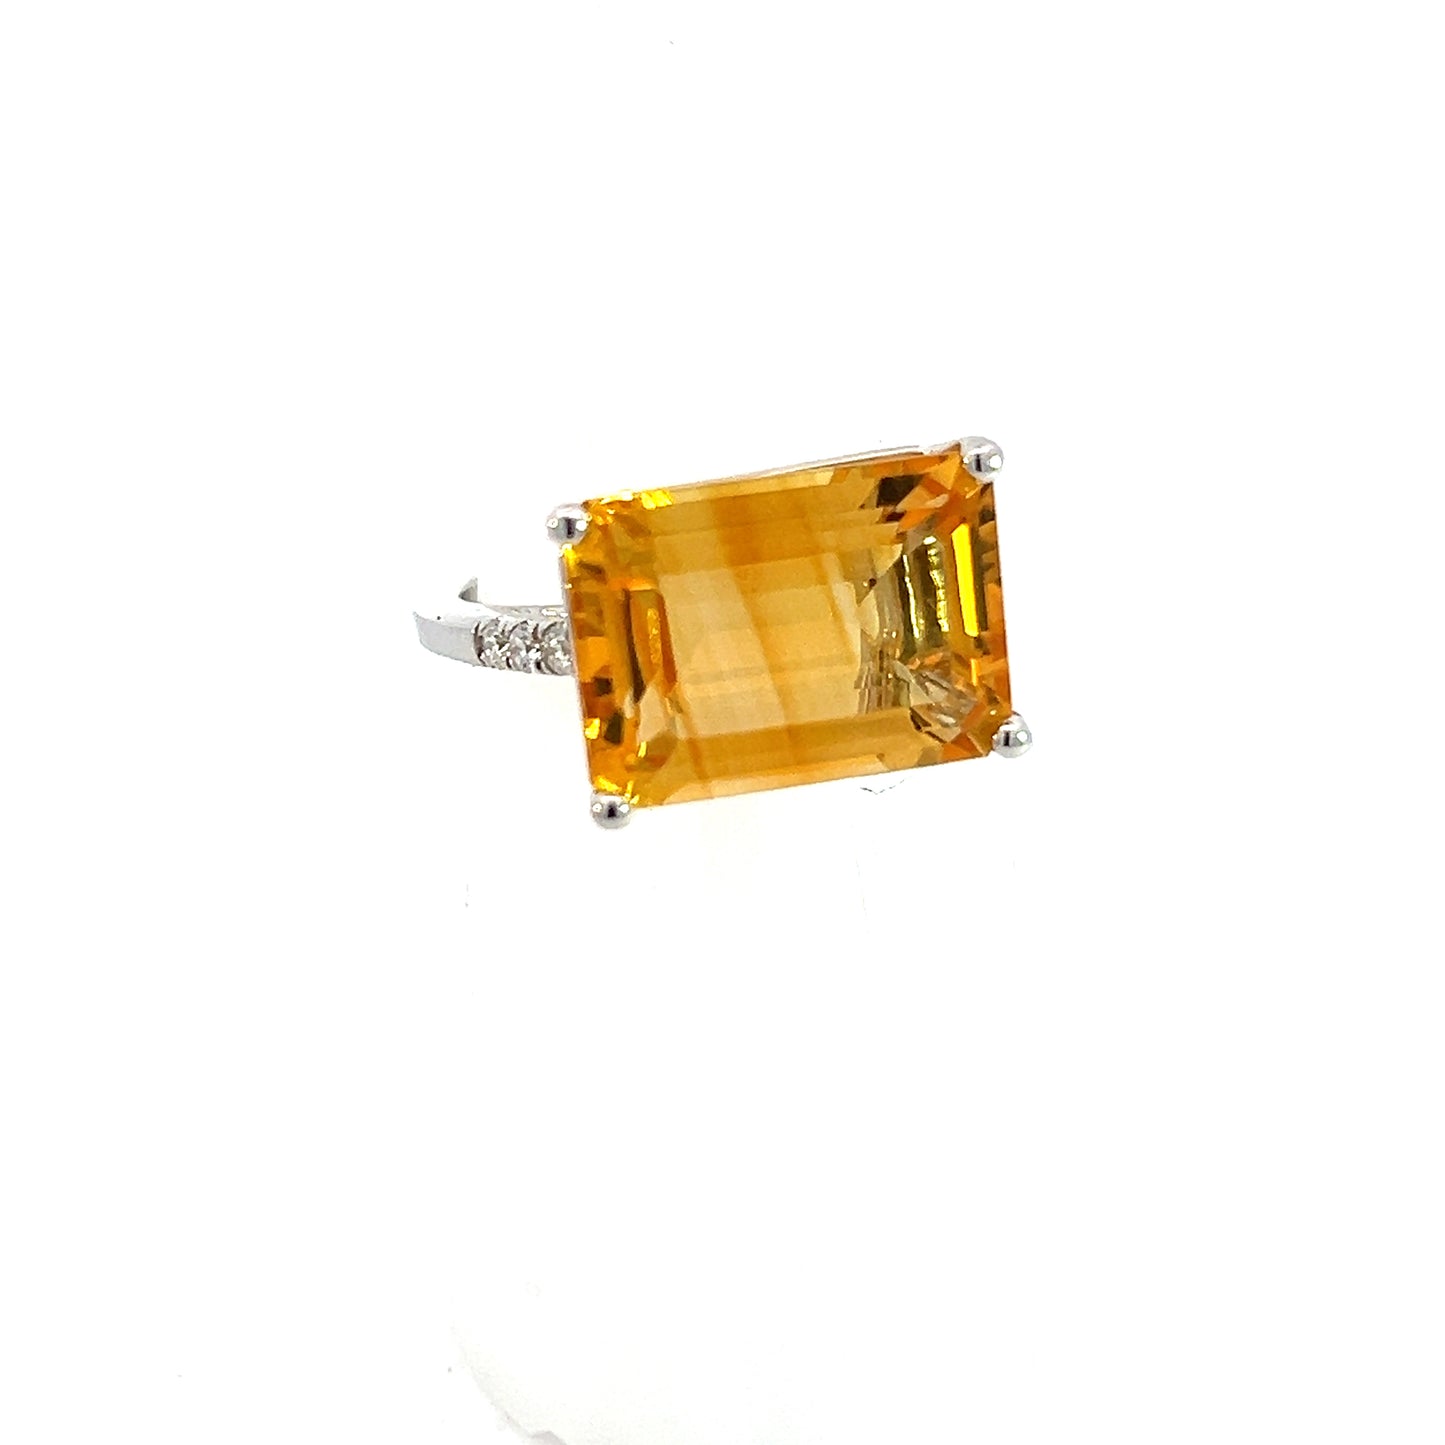 Natural Citrine Diamond Ring 6.5 14k W Gold 7.01 TCW Certified $3,950 310630